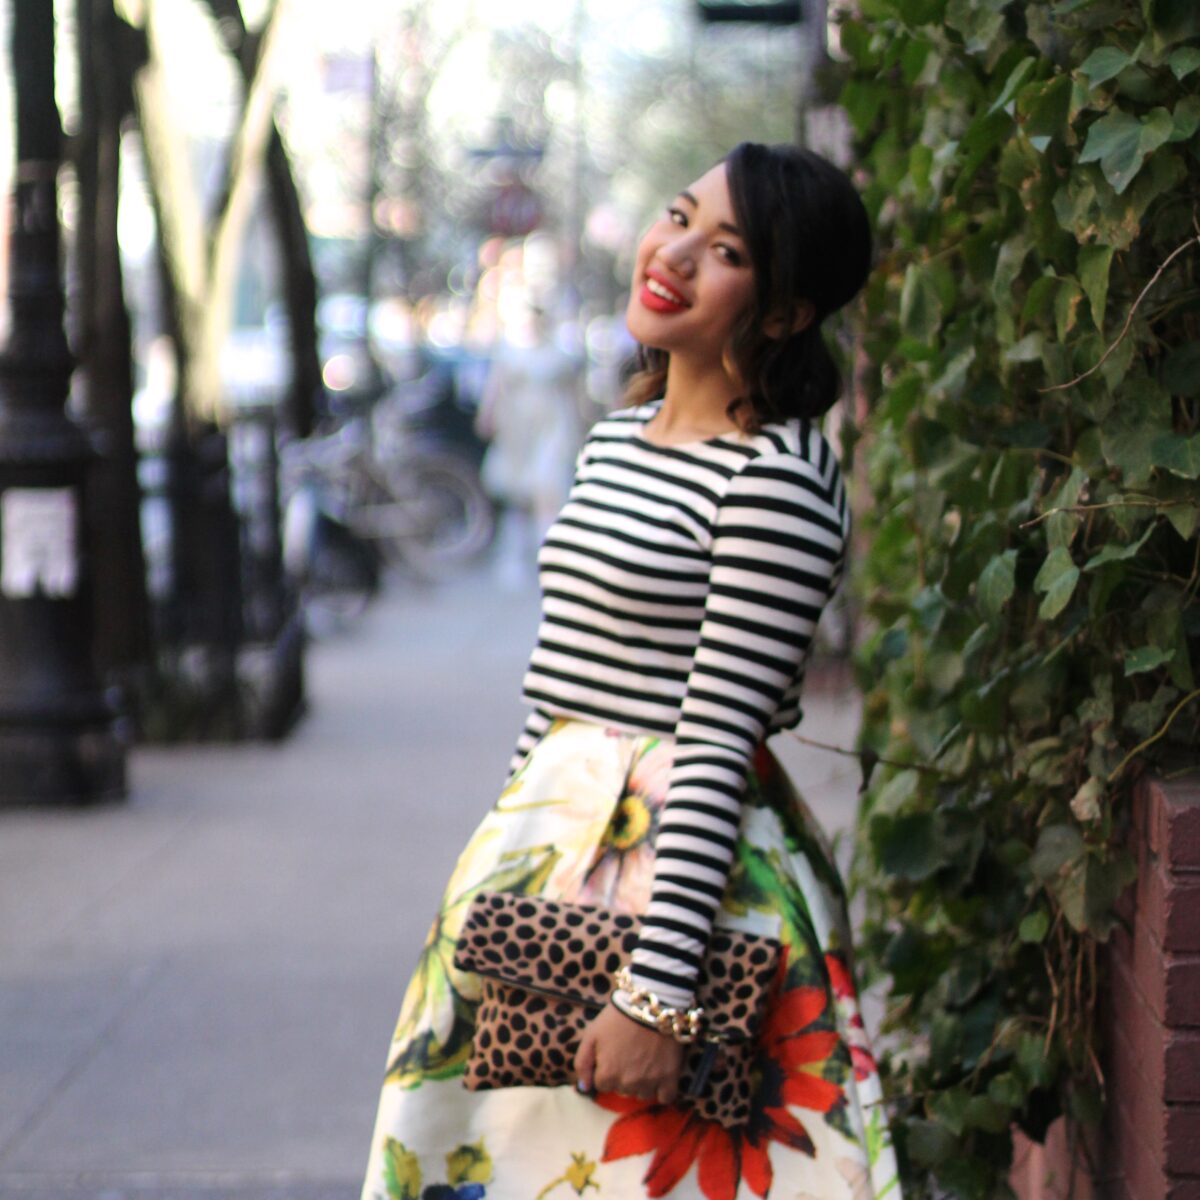 Pattern Mixing: How to Wear Polka Dots and Floral Print - living